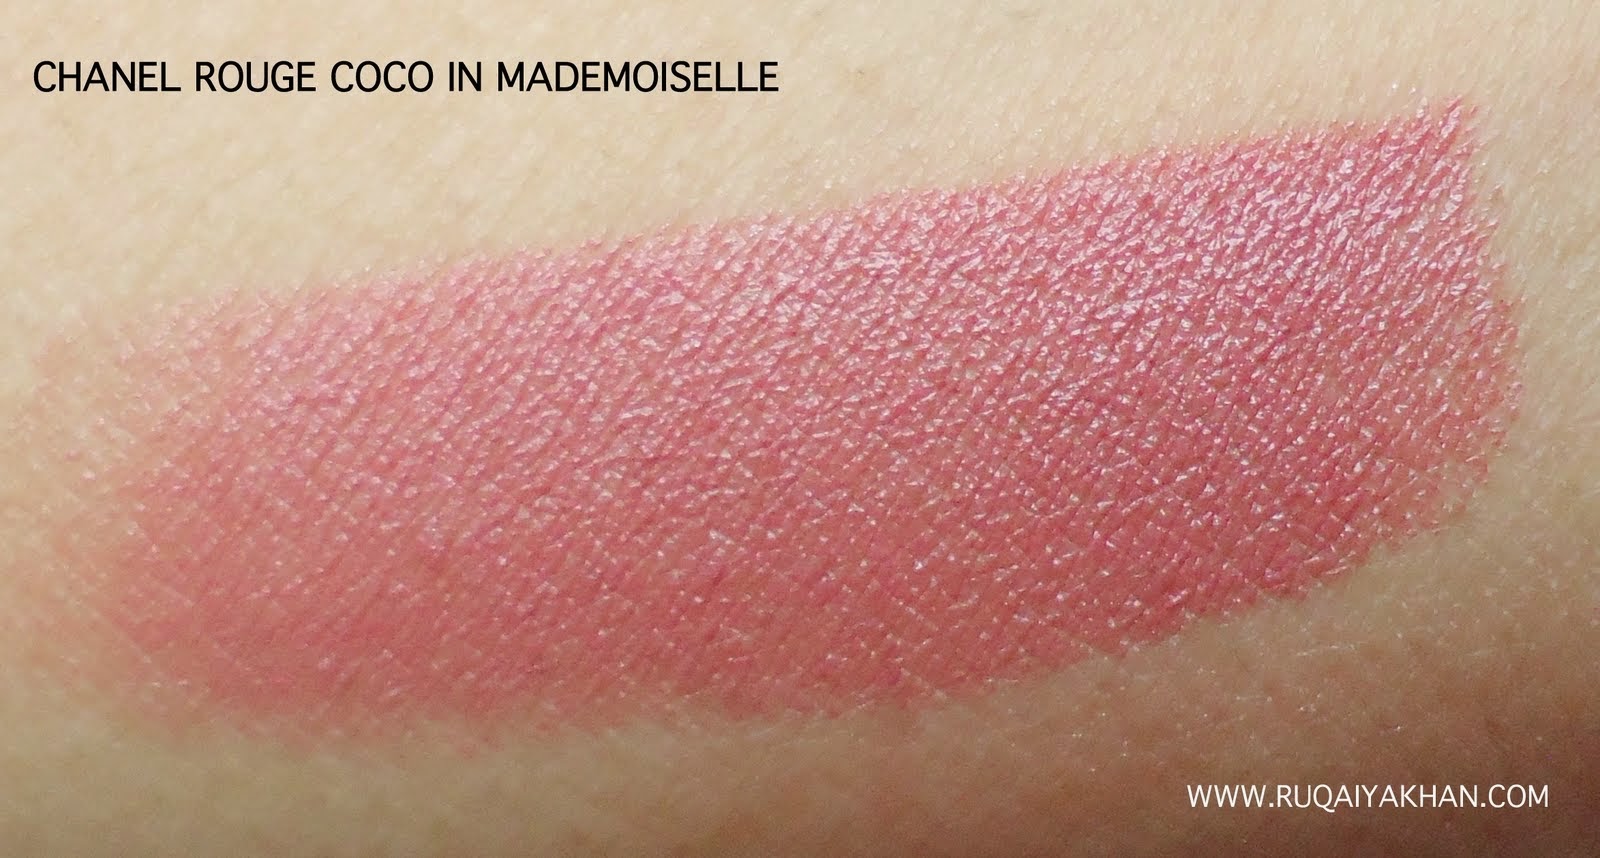 Ruqaiya Khan: CHANEL Rouge Coco Hydrating Creme Lip Color in Mademoiselle  05 - Review and Swatches